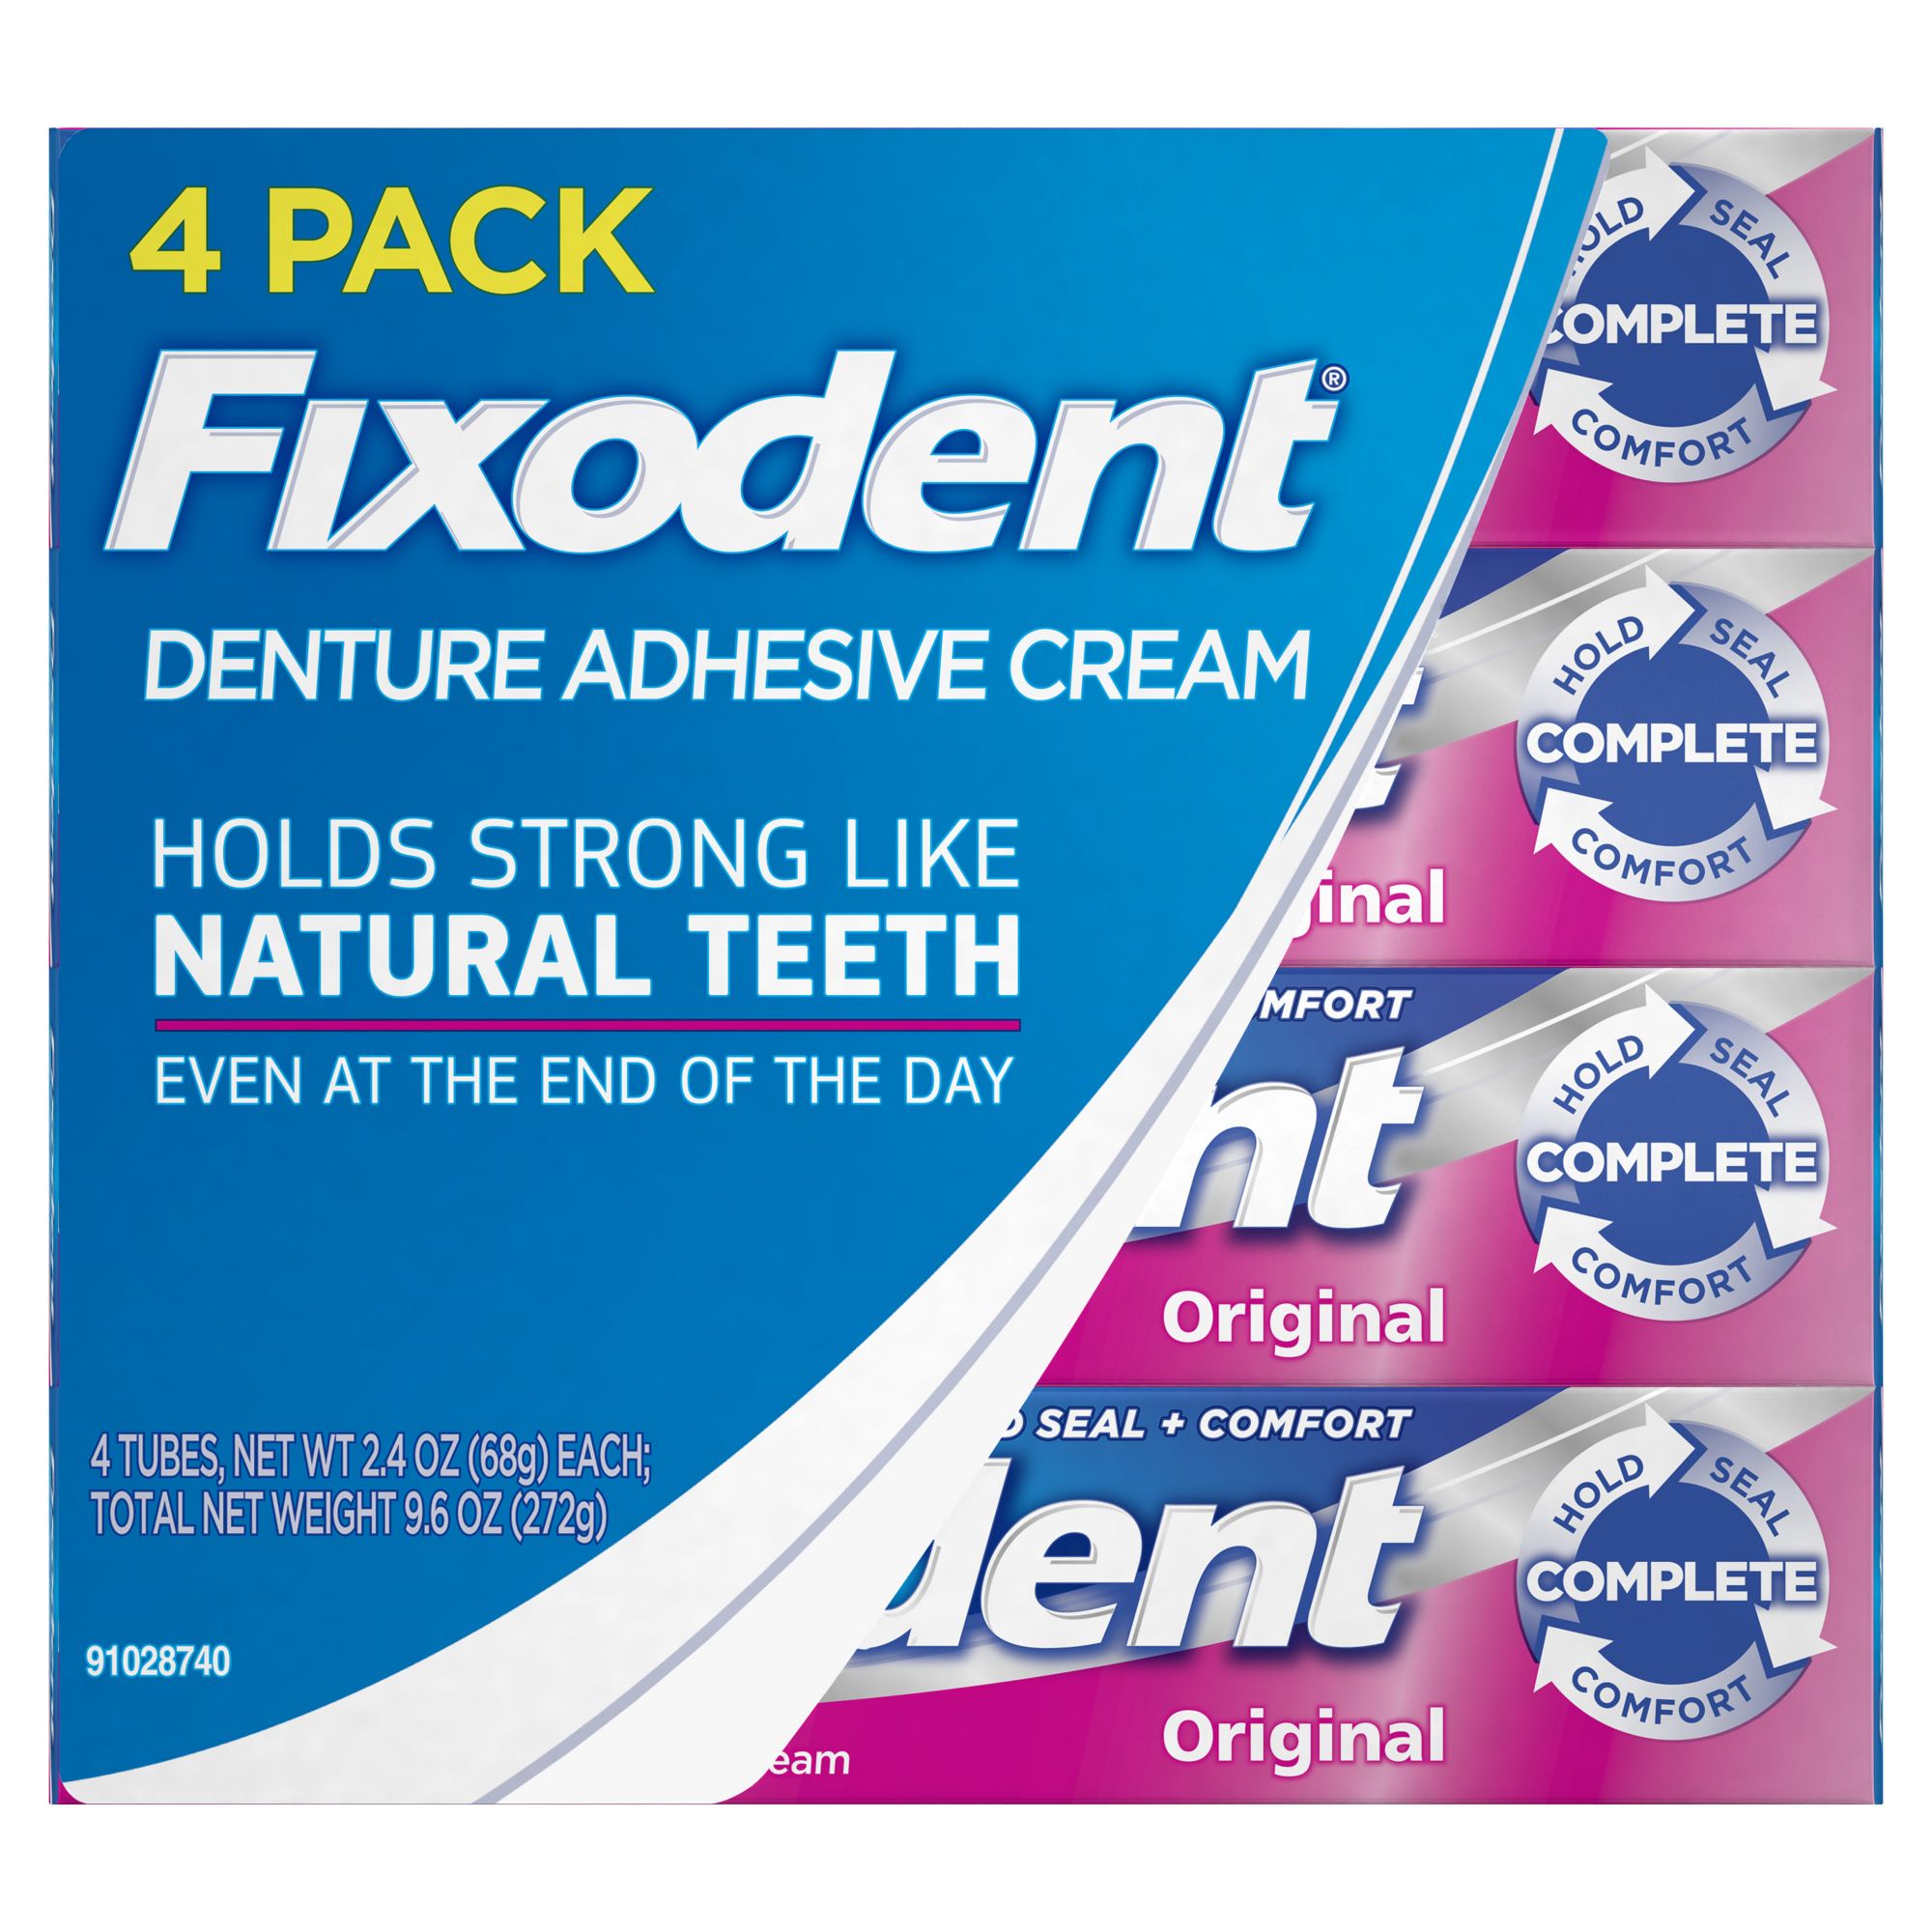 The #1 Denture Adhesive, Tips for Denture Wearers